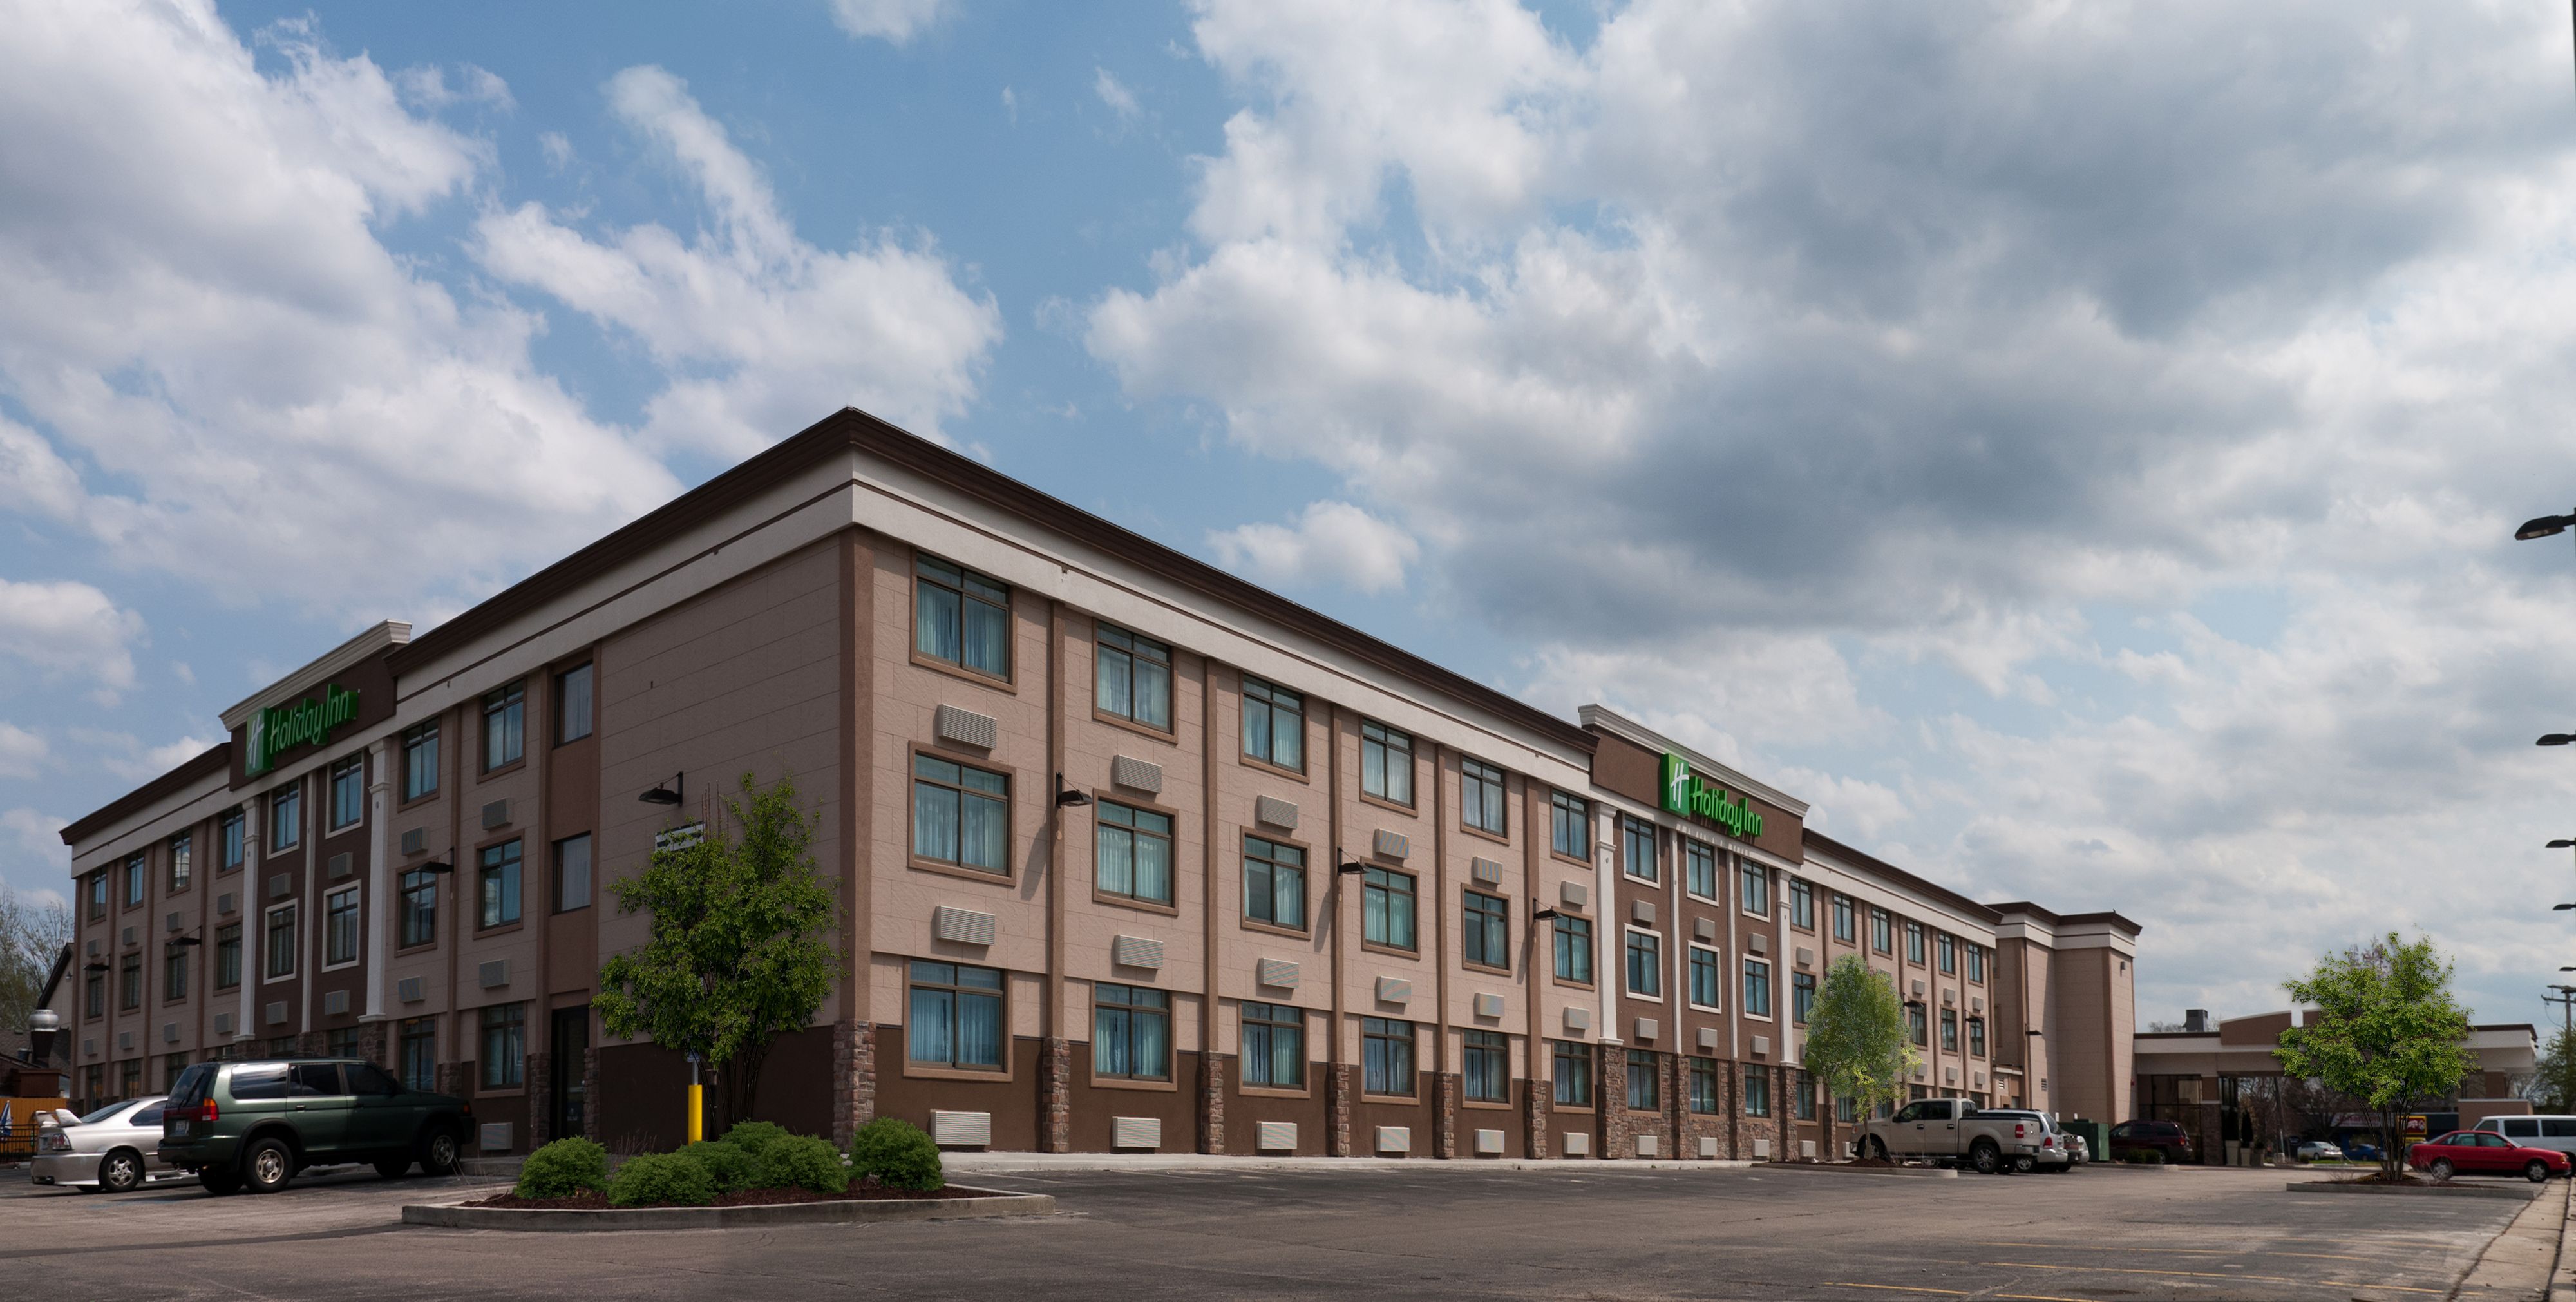 Holiday Inn Mount Prospect - Chicago in Mt. Prospect, IL | Whitepages